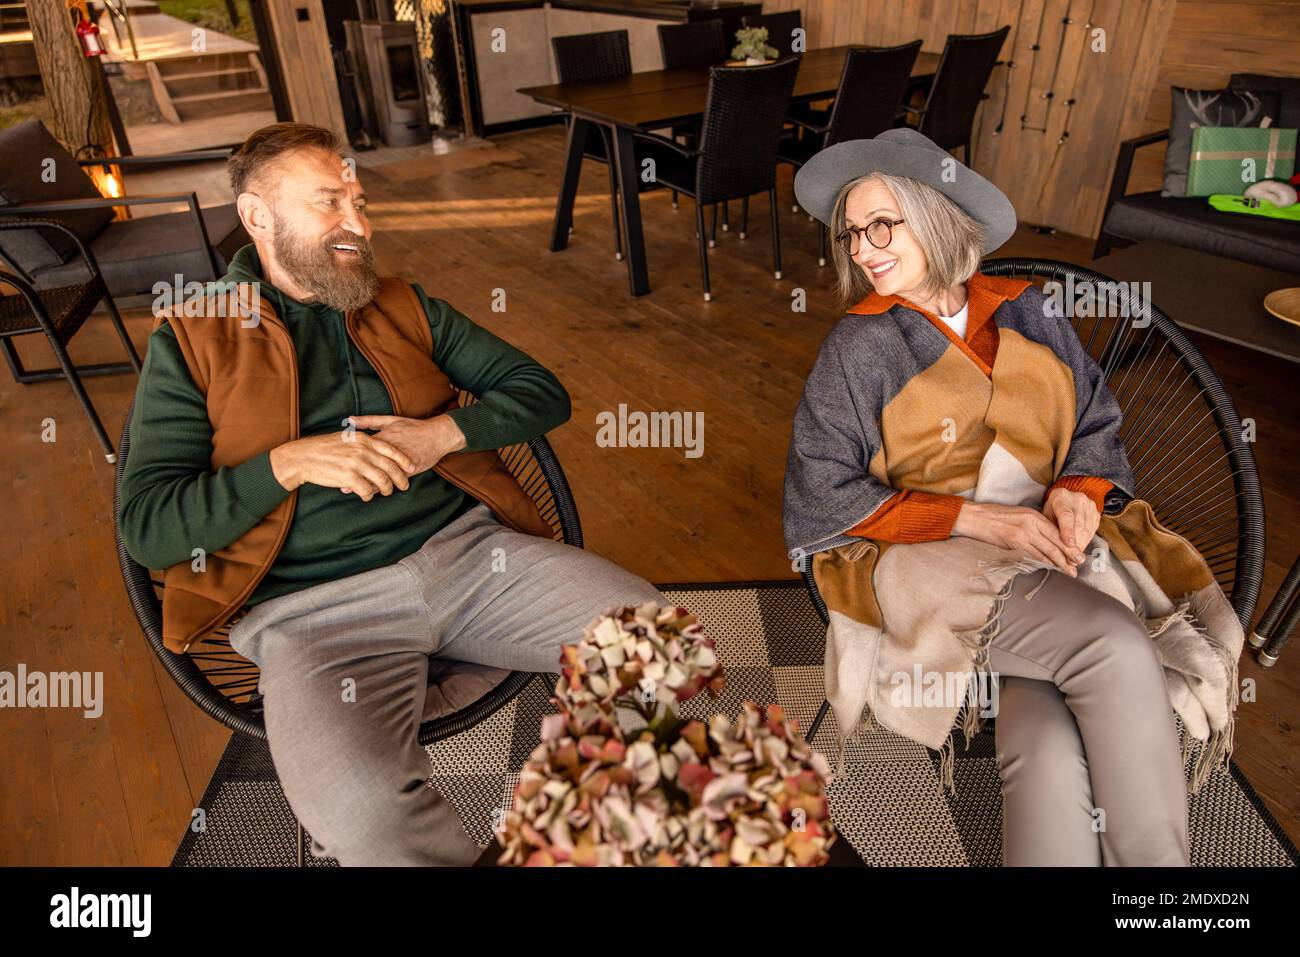 Mature couple spending time together and looking peaceful and relaxed Stock Photo